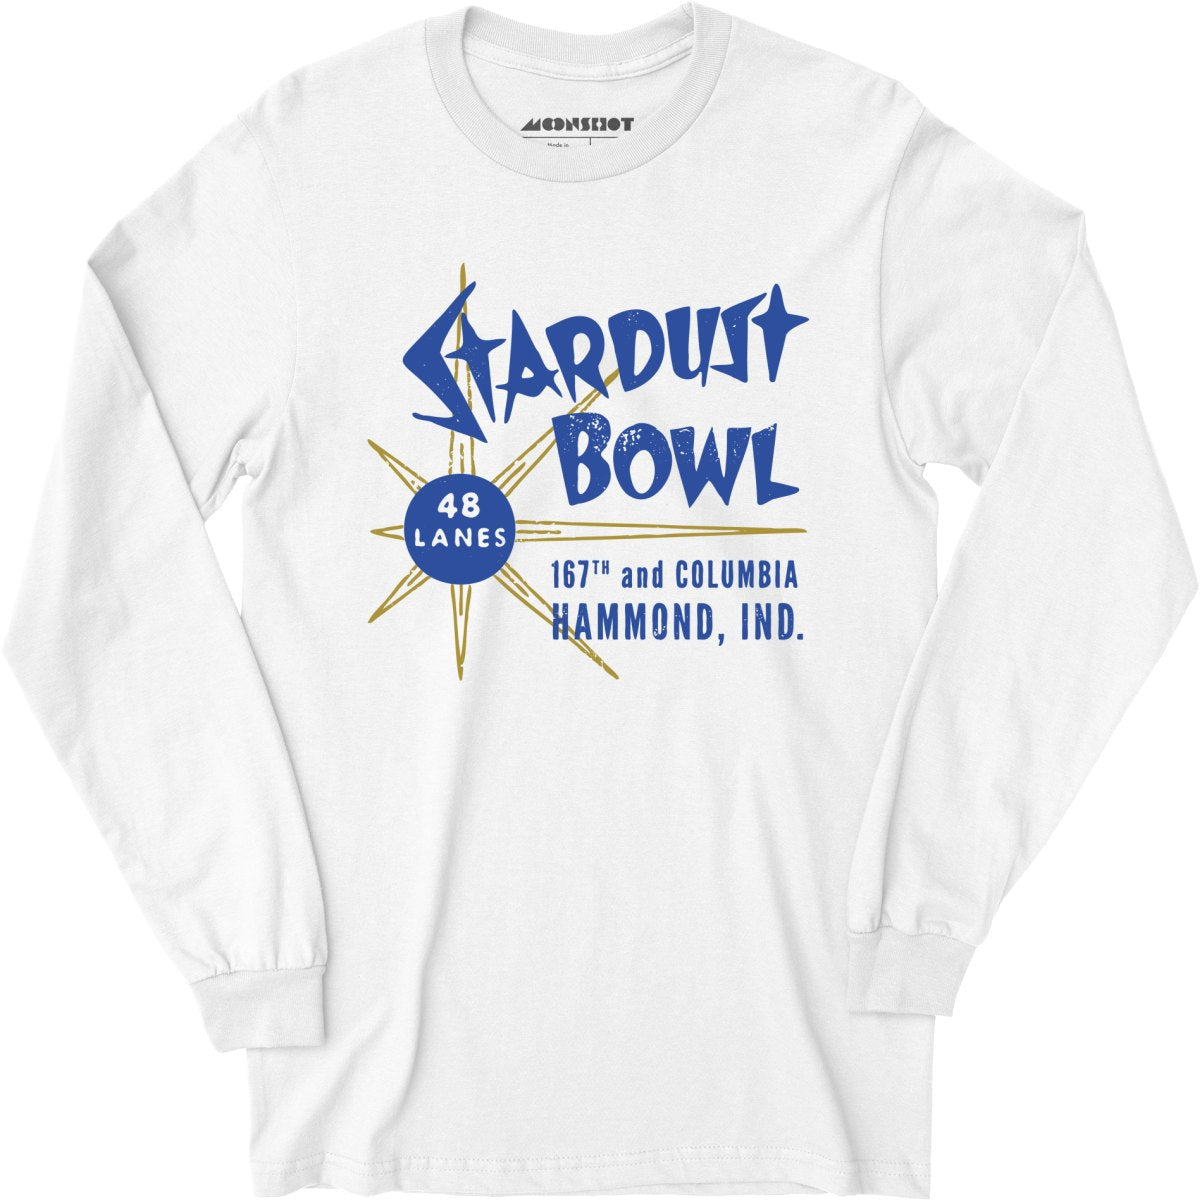 Stardust Bowl - Hammond, IN - Vintage Bowling Alley - Long Sleeve T-Shirt